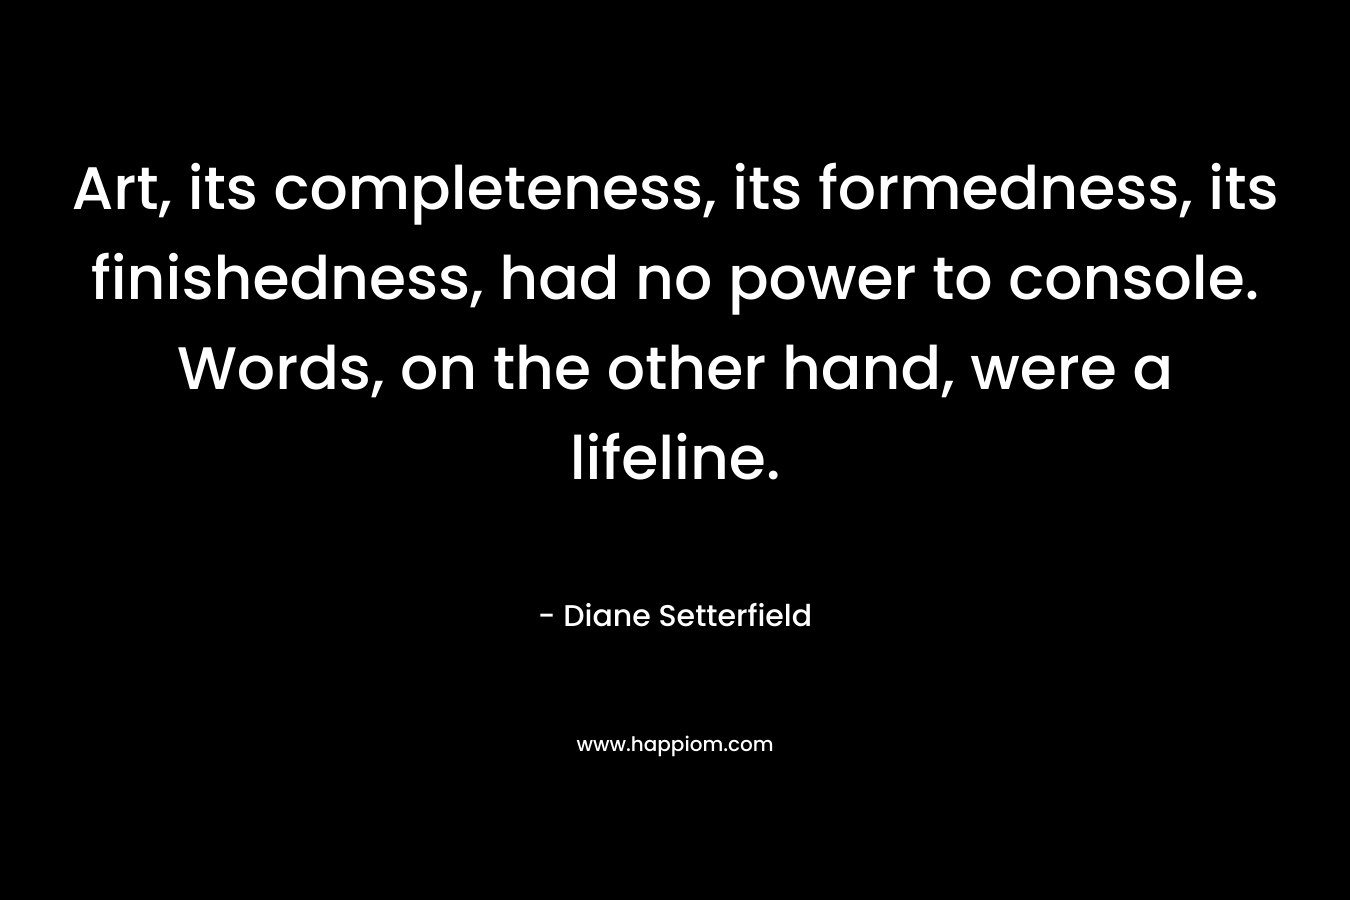 Art, its completeness, its formedness, its finishedness, had no power to console. Words, on the other hand, were a lifeline. – Diane Setterfield